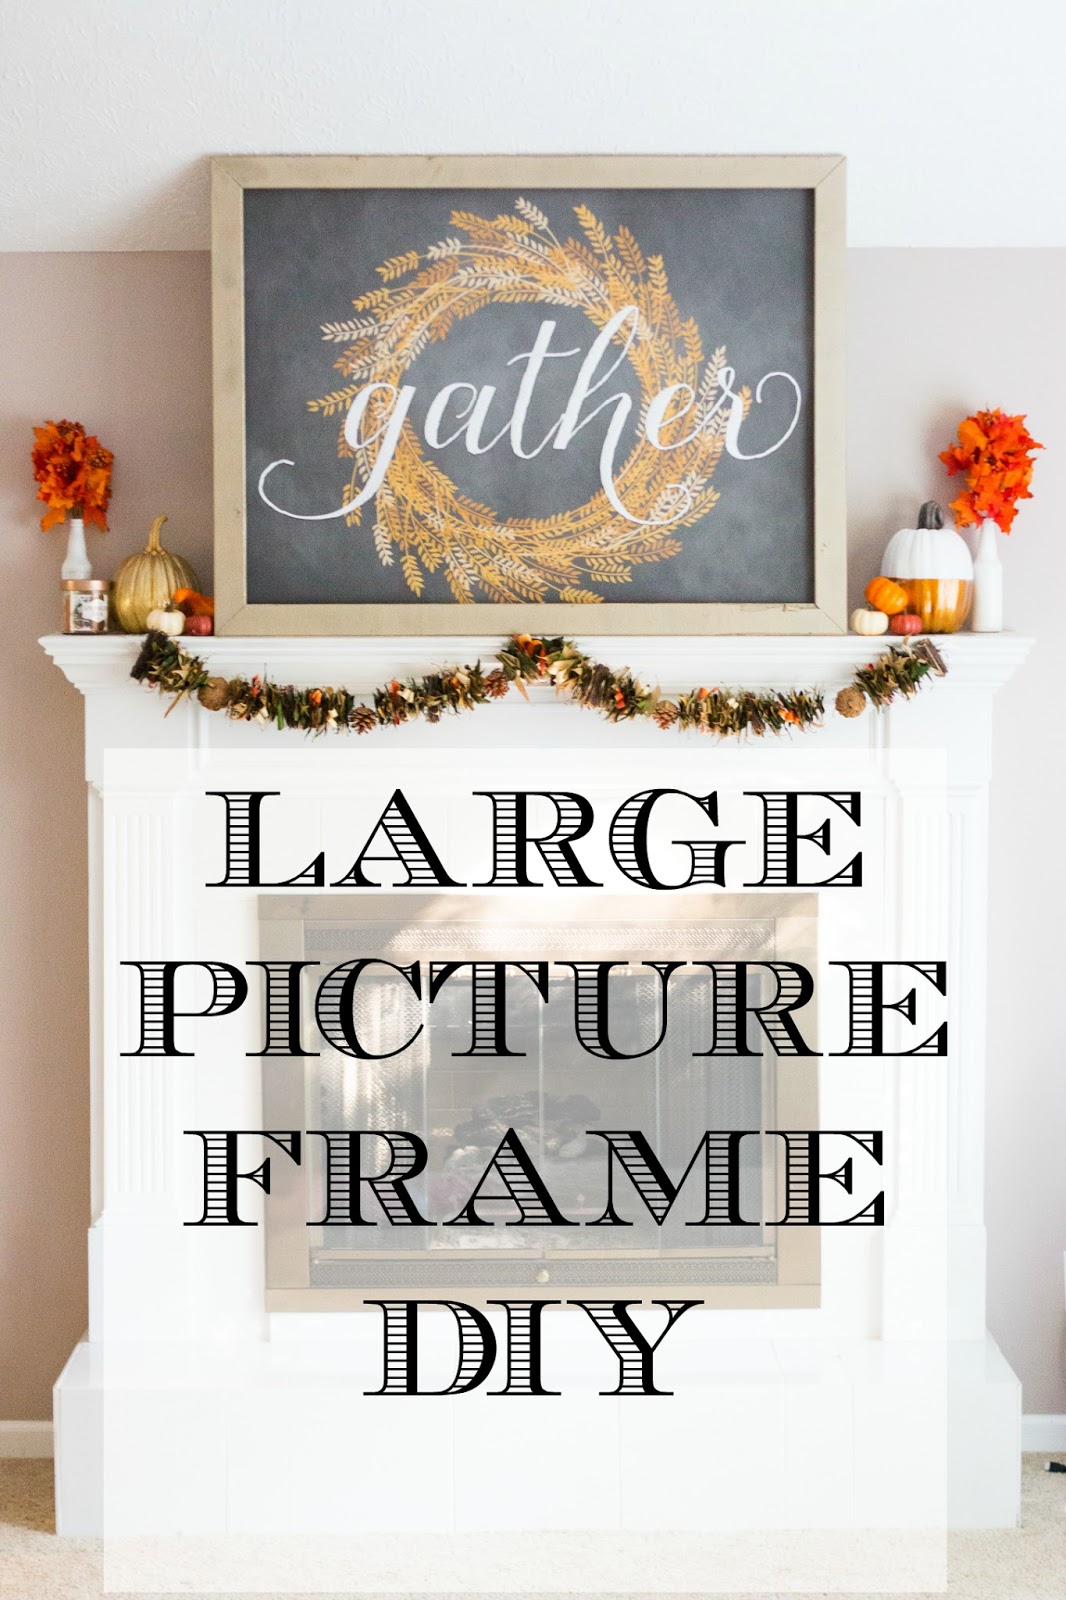 How to Make a Picture Frame for LARGE Prints